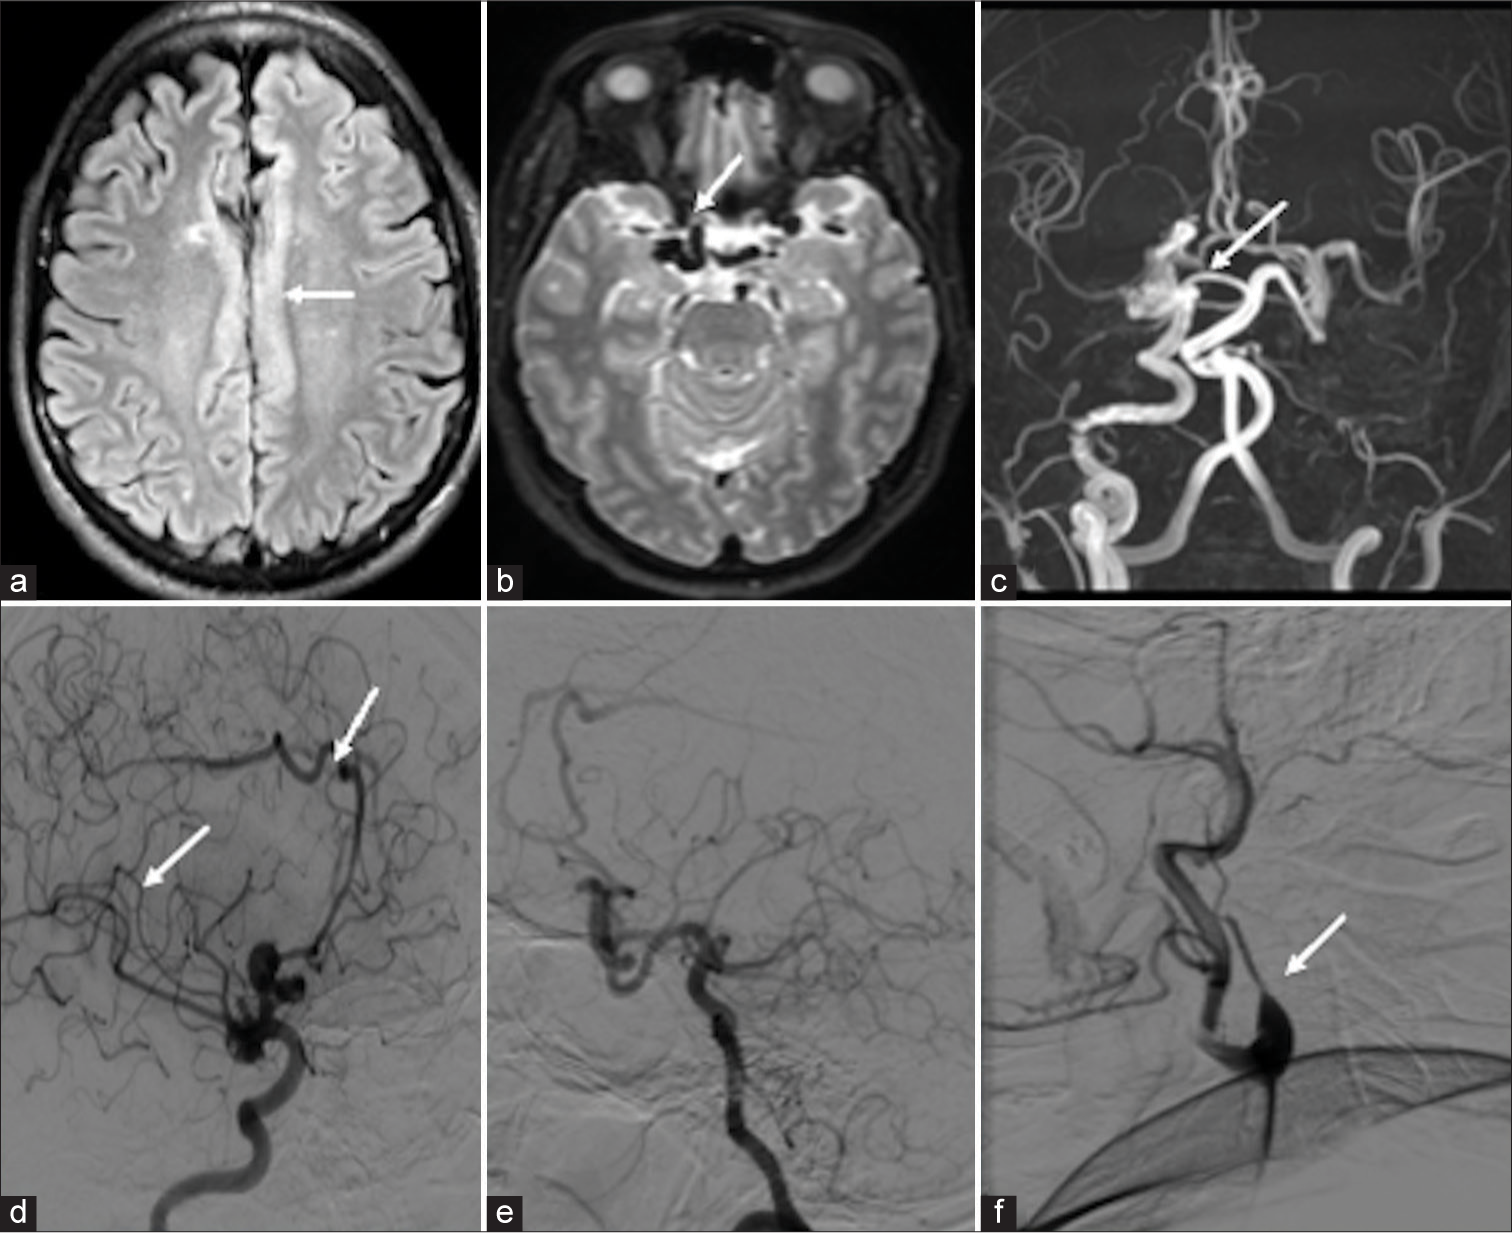 (a-c) Magnetic resonance imaging (MRI) digital subtraction imaging showed the imaging features of pure arterial malformation (PAM) MRI image: (a) Axial fluid-attenuated inversion recovery showed pachygyria over the cingulate cortex (white arrow), (b) axial T2 image showed multiple abnormal dilated vessels in the right supraclinoid internal carotid artery (ICA) (white arrow), and (c) time-of-flight circle of Willis showed dilated right supraclinoid ICA and right pericallosal artery without abnormal veins and non-visualization of the left ICA (white arrow). (d-f) Digital subtraction angiography image: (d) Right common carotid artery (CCA) lateral showed abnormally dilated arteries in the right supraclinoid ICA, pericallosal artery with aneurysm, without abnormal draining vein (white arrow). (e) The right vertebral artery showed multiple collaterals and filling of the left middle cerebral artery through the left posterior communicating artery. (f) The left CCA run showed non-visualization of the left ICA from bifurcation and continued as ascending pharyngeal artery (white arrow).